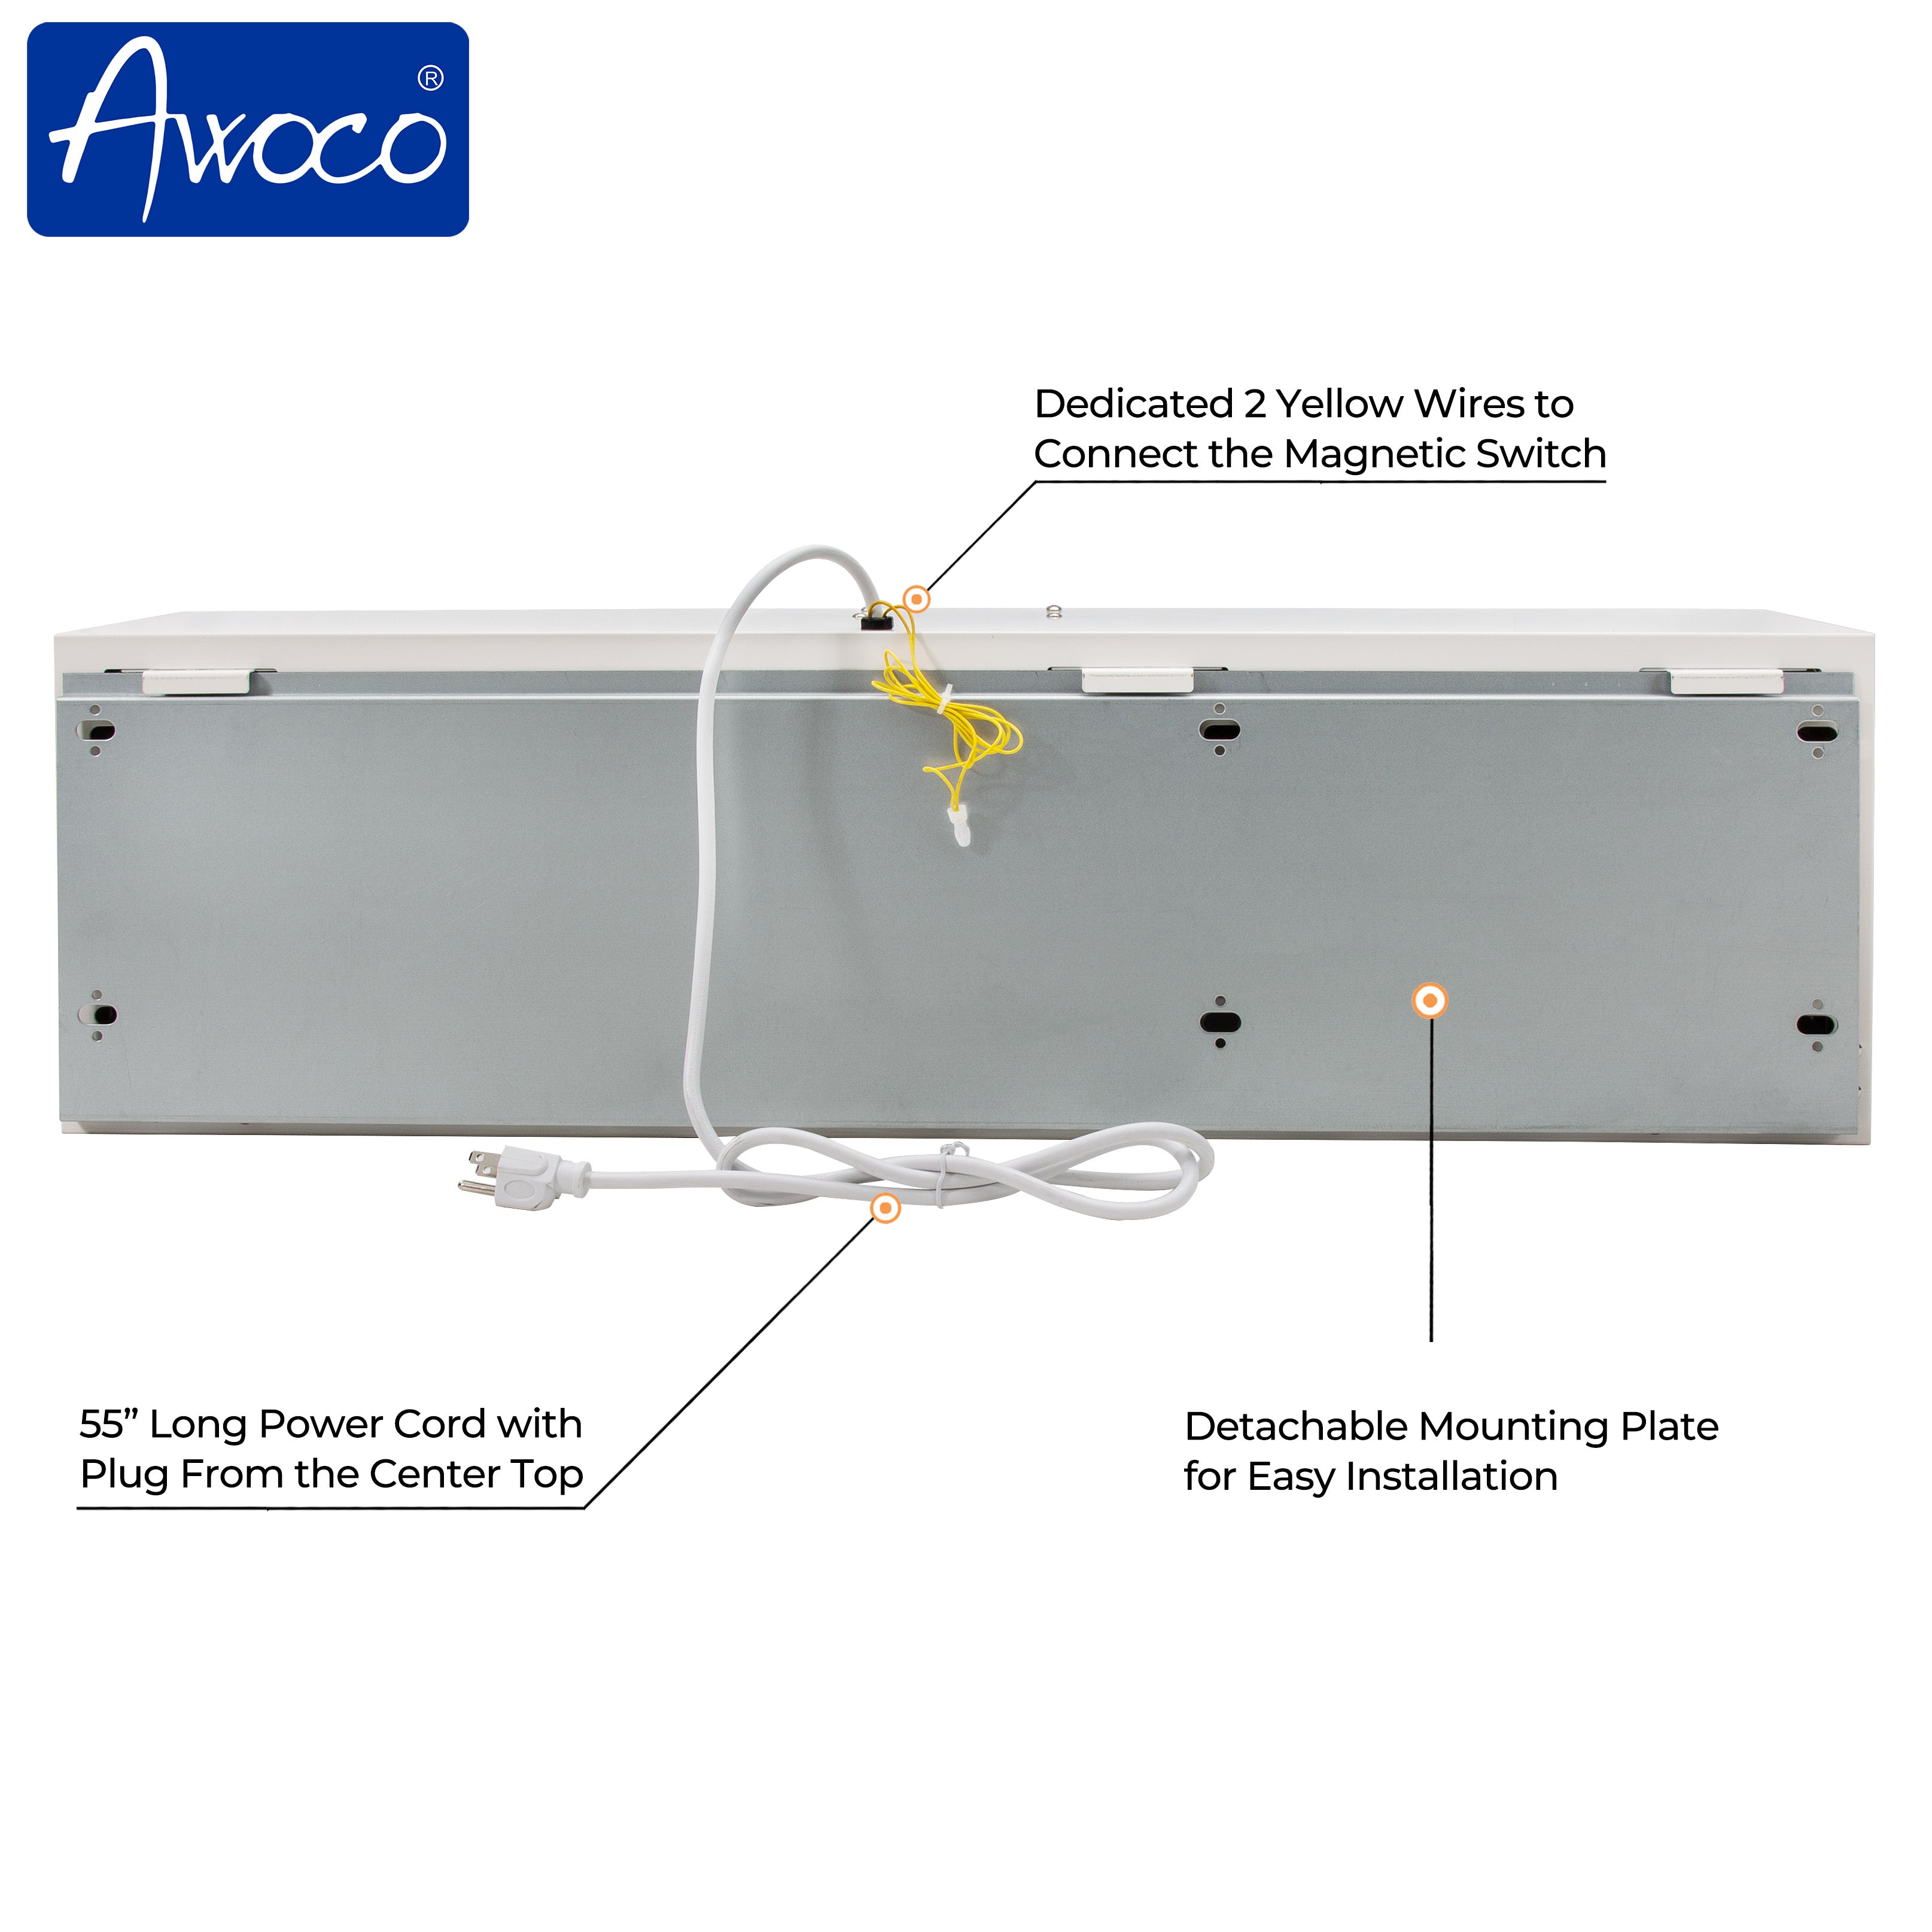 Awoco 48" Super Power 1 Speed 1700 CFM Commercial Indoor Air Curtain, 120V Unheated, ETL & UL Certified to Meet NSF 37 Food Service Standard